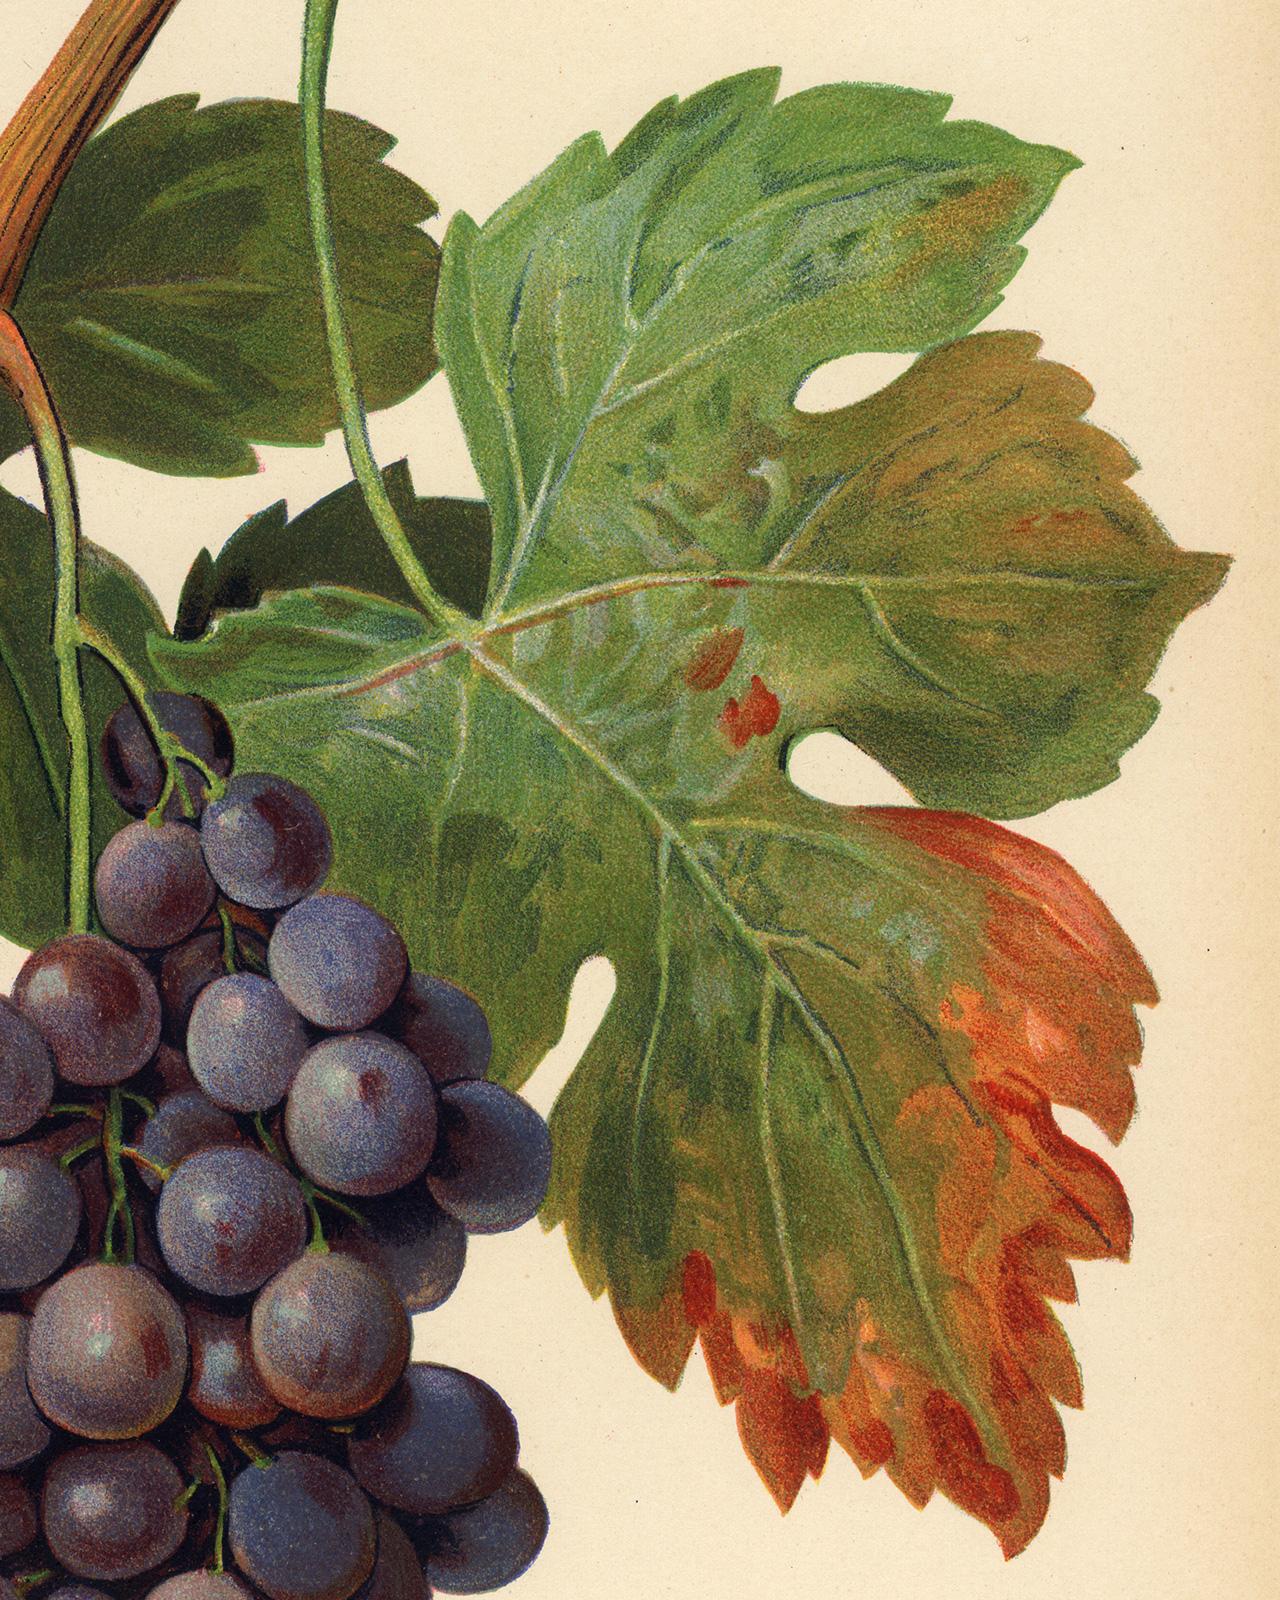 Palomino Commun grape - Ampelography by Vermorel - Lithograph - Early 20th c. - Contemporary Print by Victor Vermorel